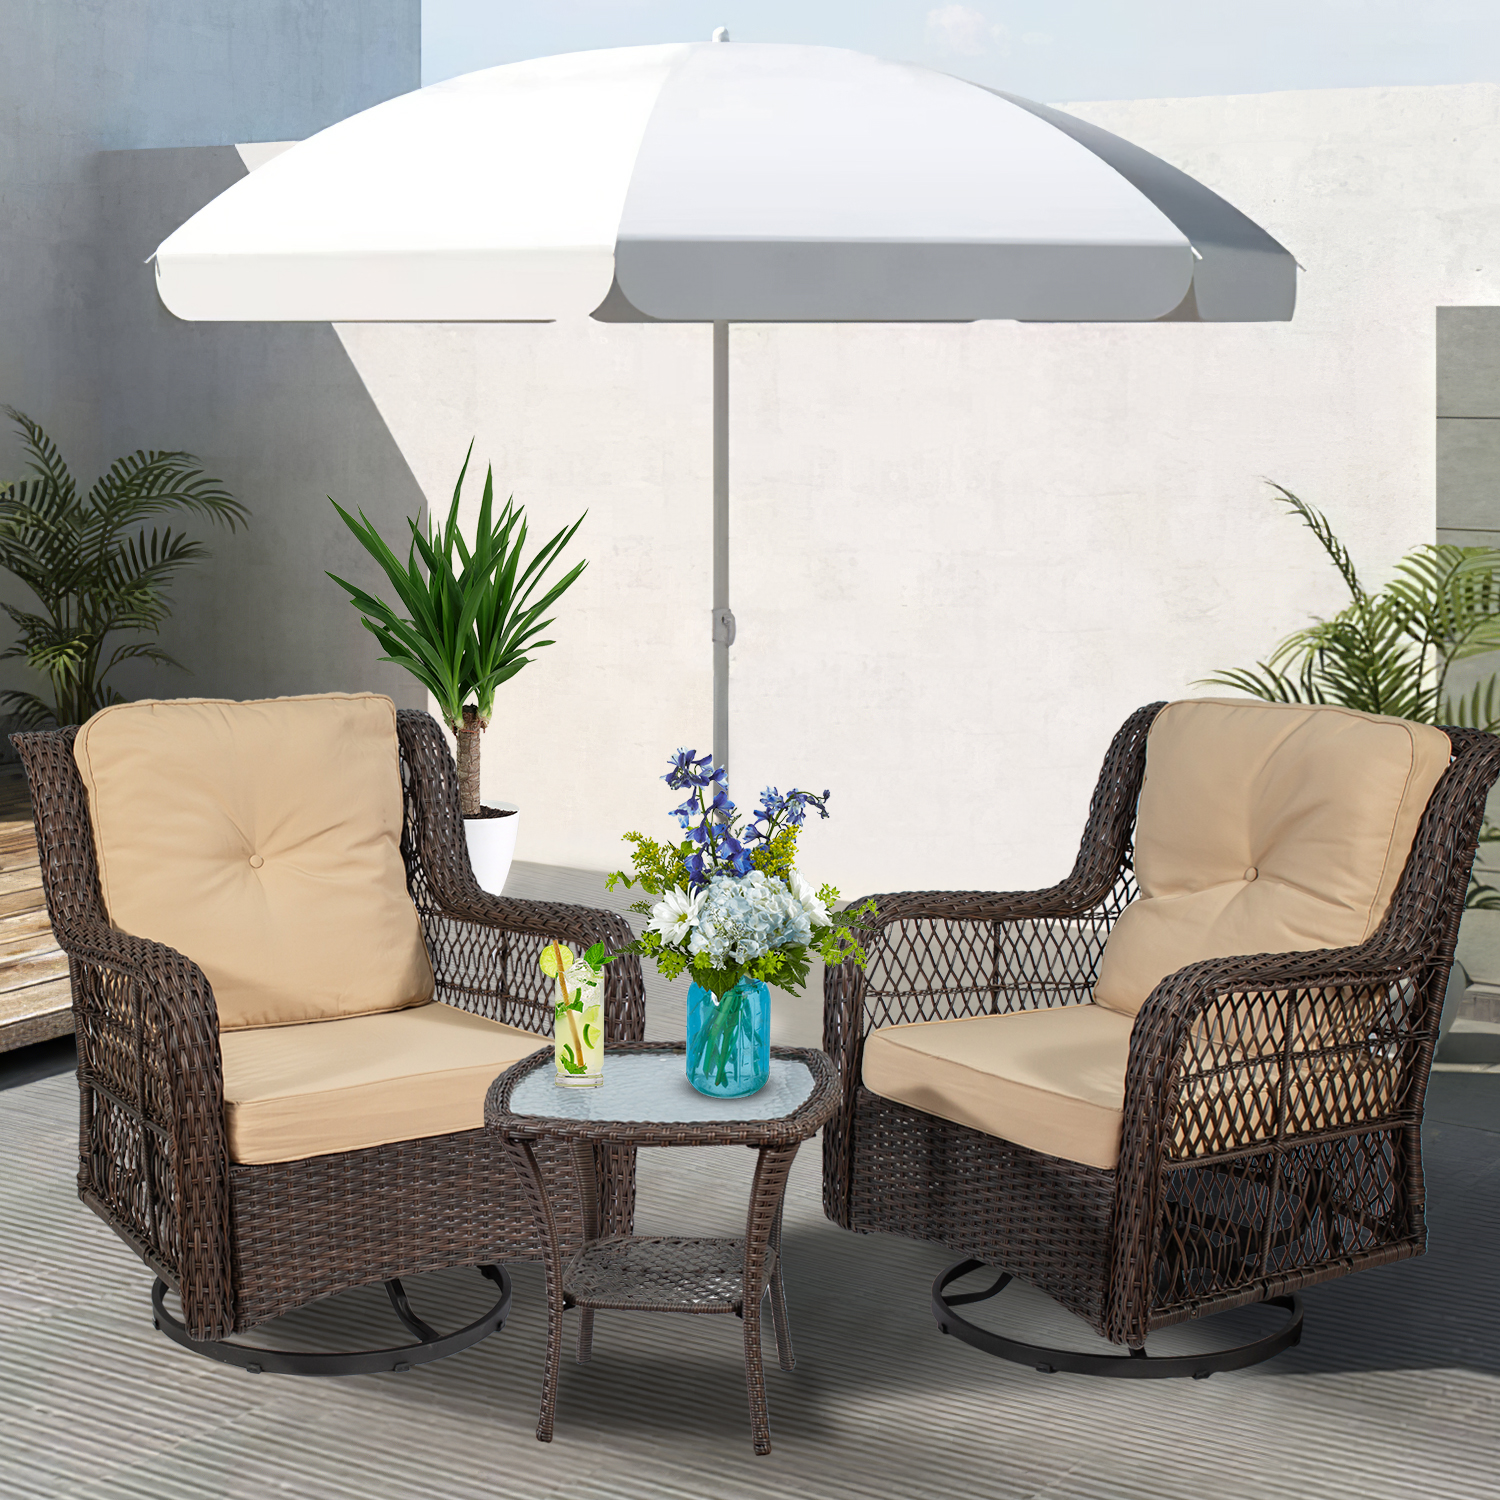 Outdoor Swivel Patio Lounge Chairs 3-Piece Patio Conversation Bistro Set w/Wicker Patio Chairs and Side Table for Small Space Deck Porch 350 LBS Beige - image 2 of 13